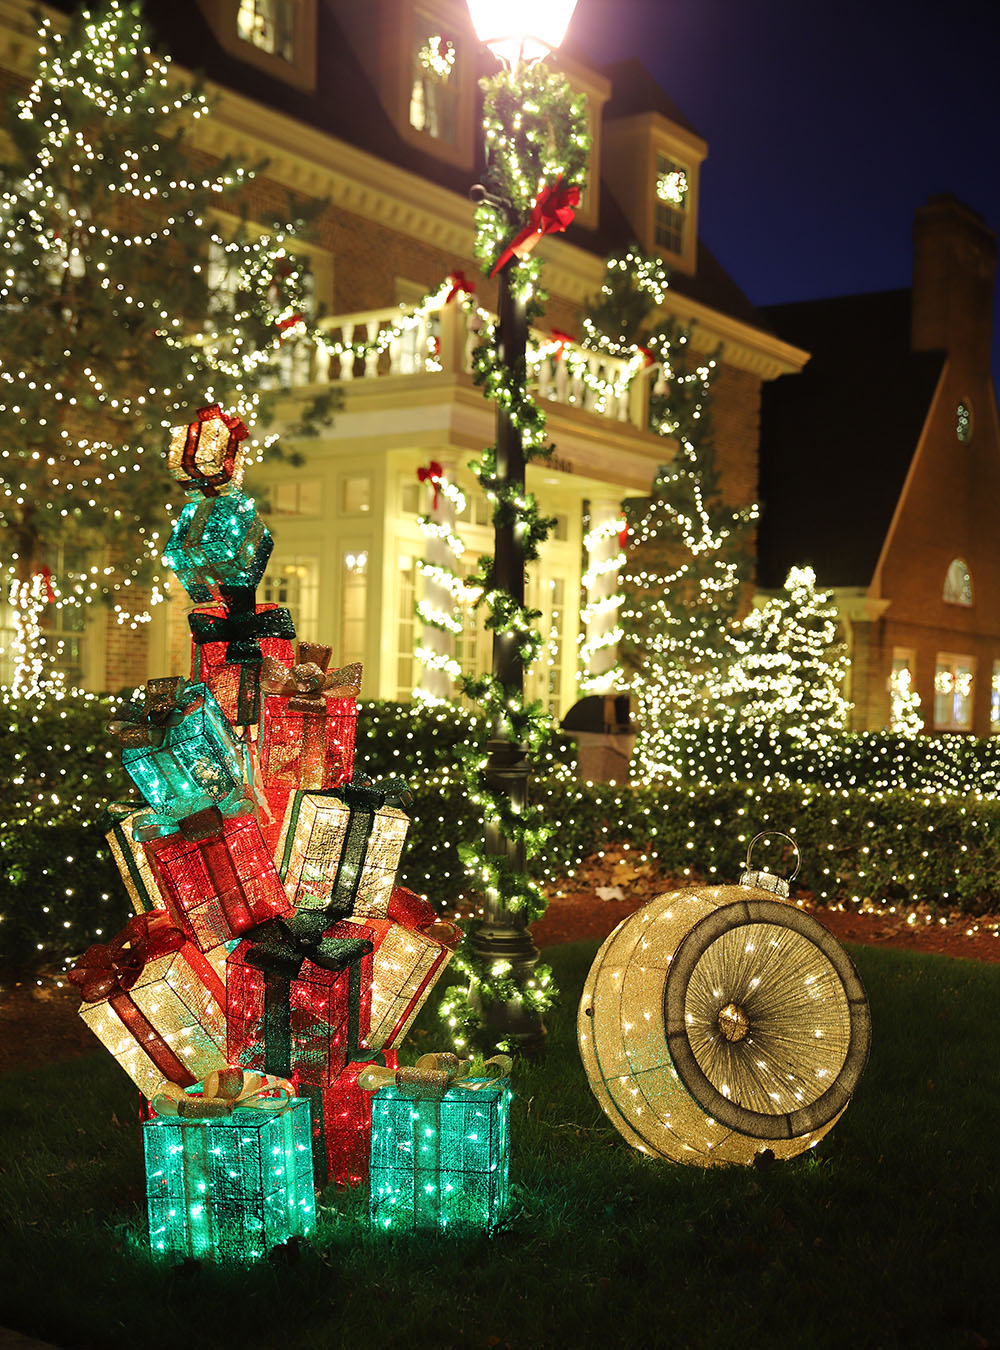 Presents and ornament decorative lights sit outside of an illuminated building.